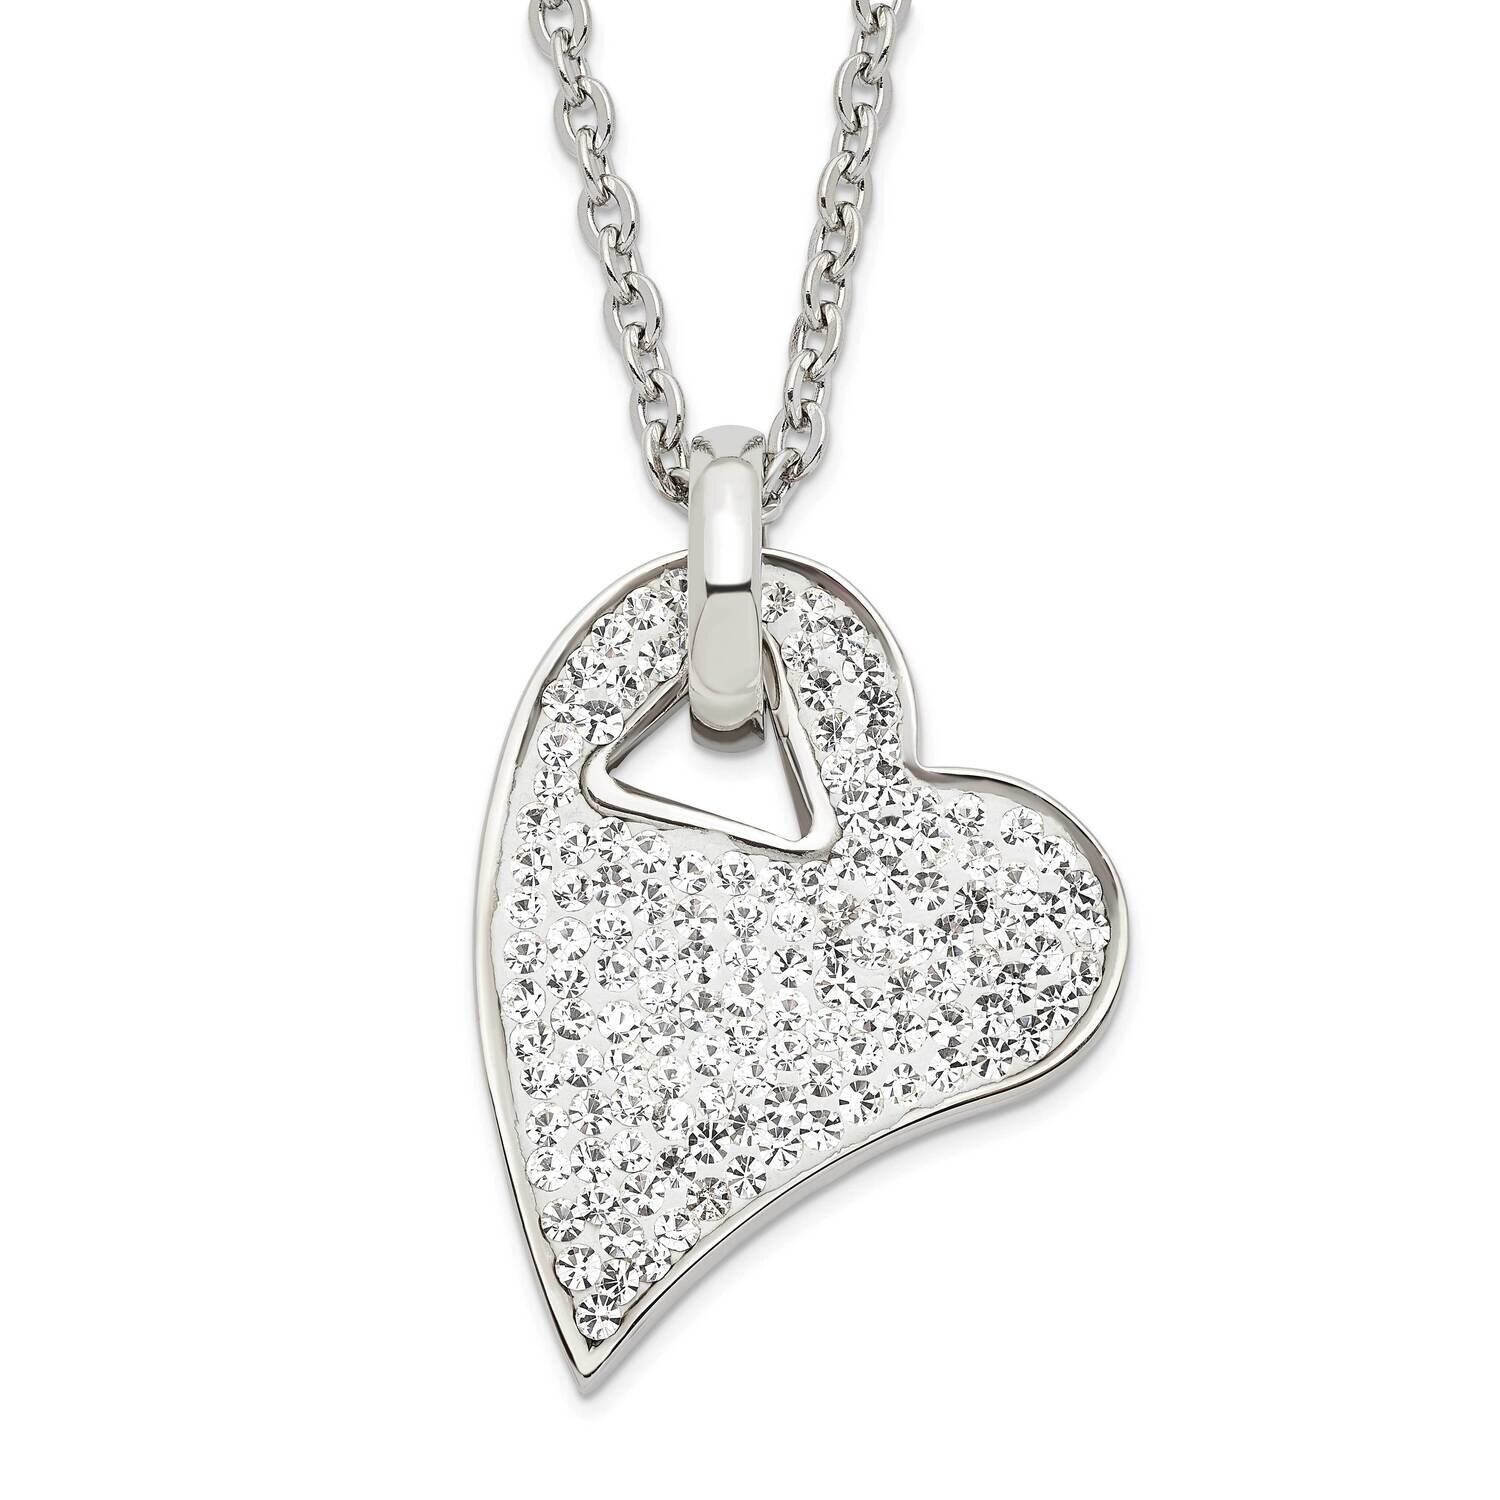 Clear Crystal Heart Pendant Necklace Stainless Steel SRN788-20